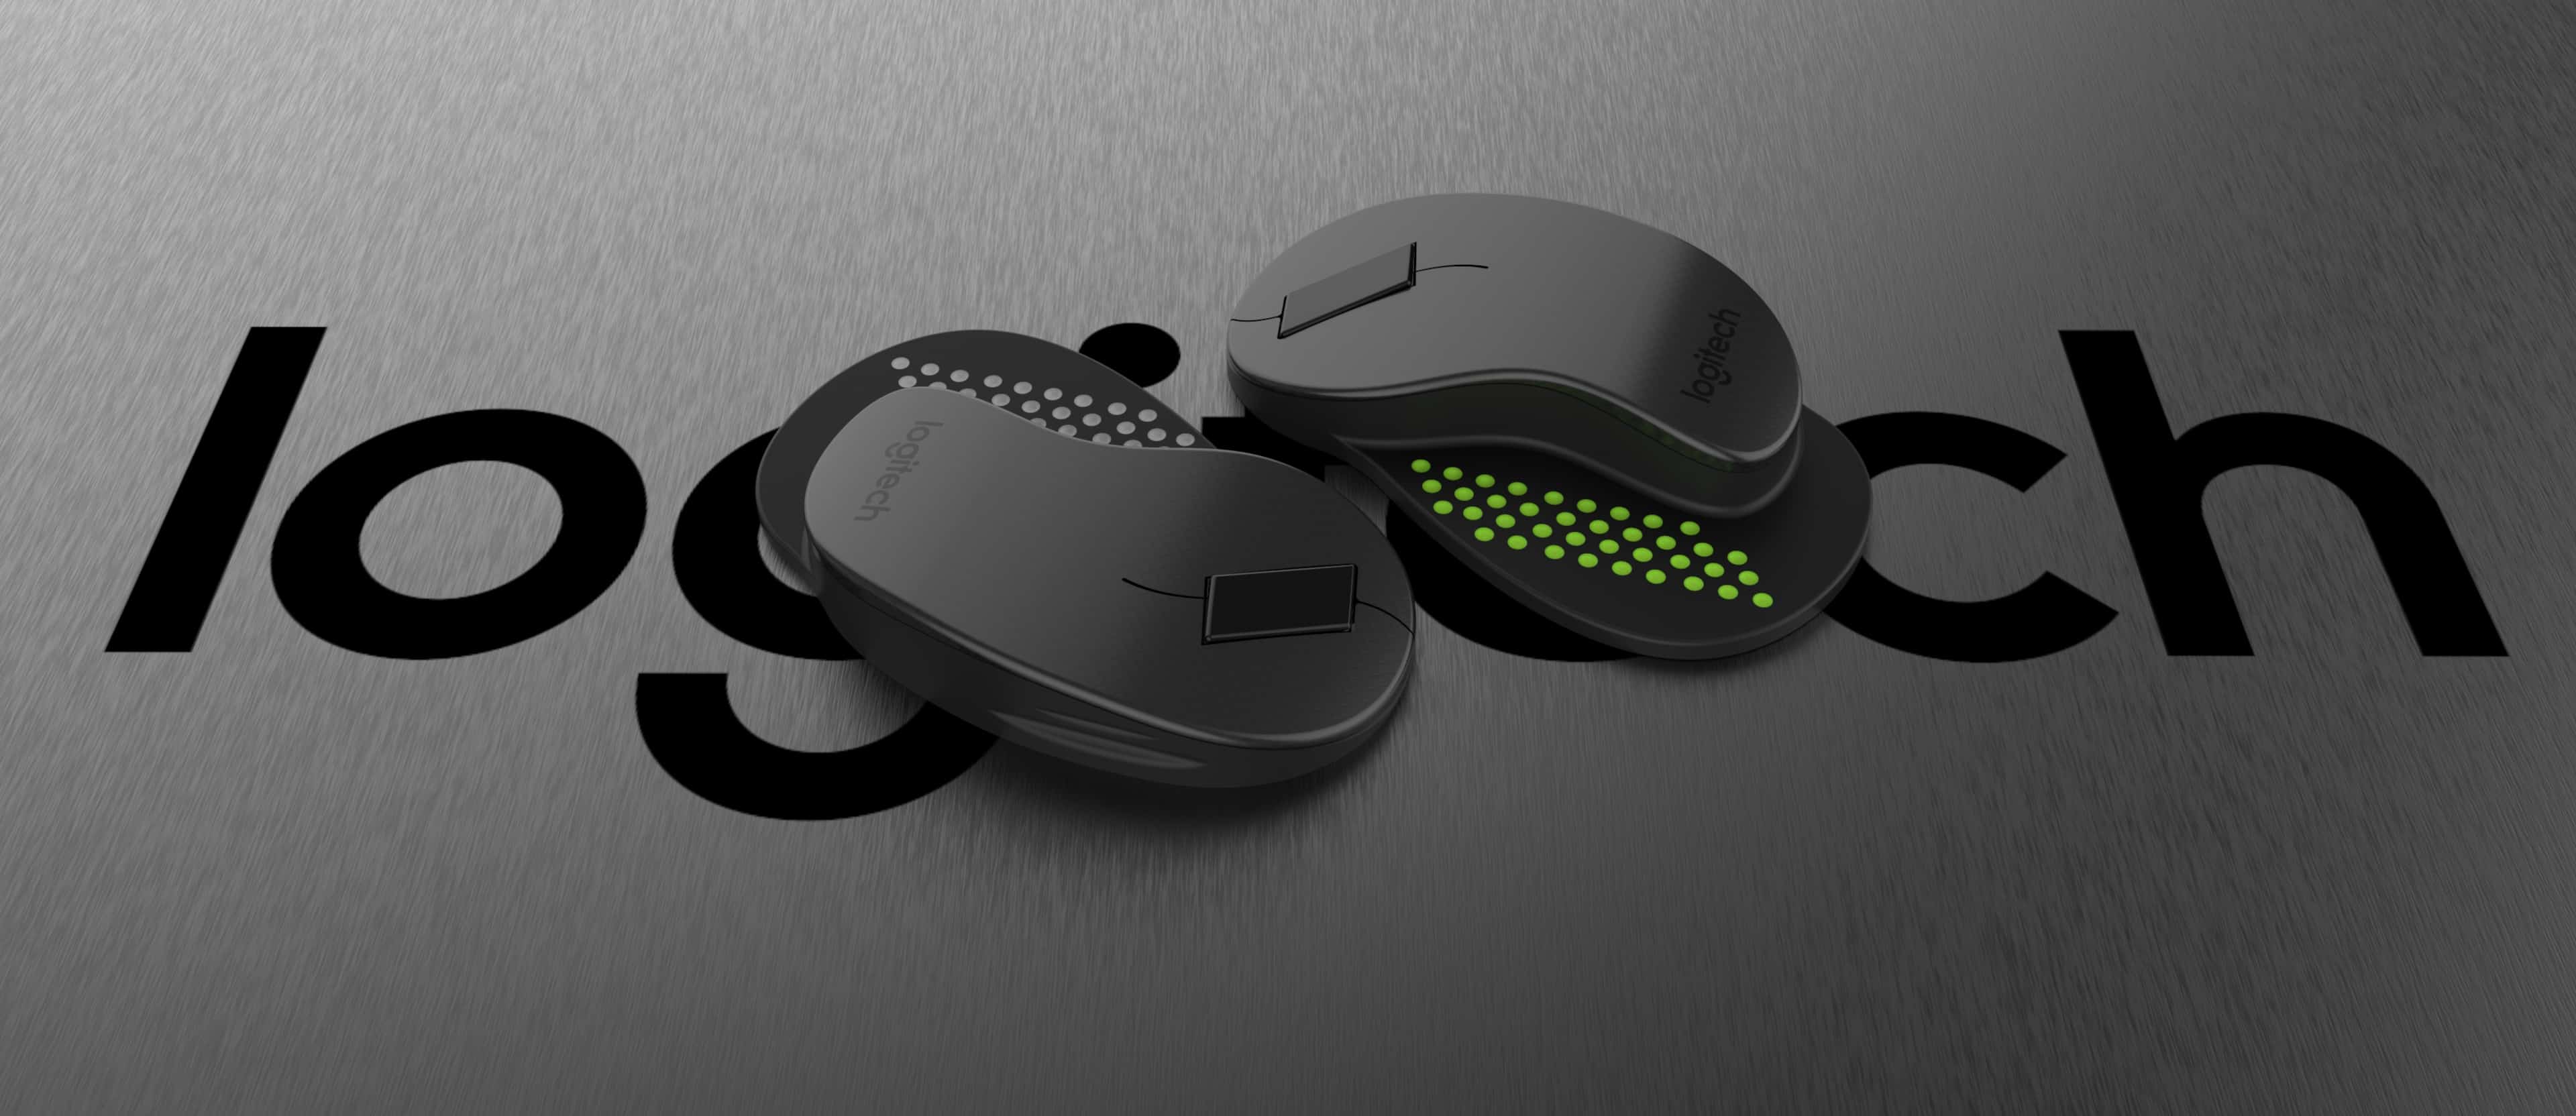 Logitech Concept (Touch Scroll) Mouse